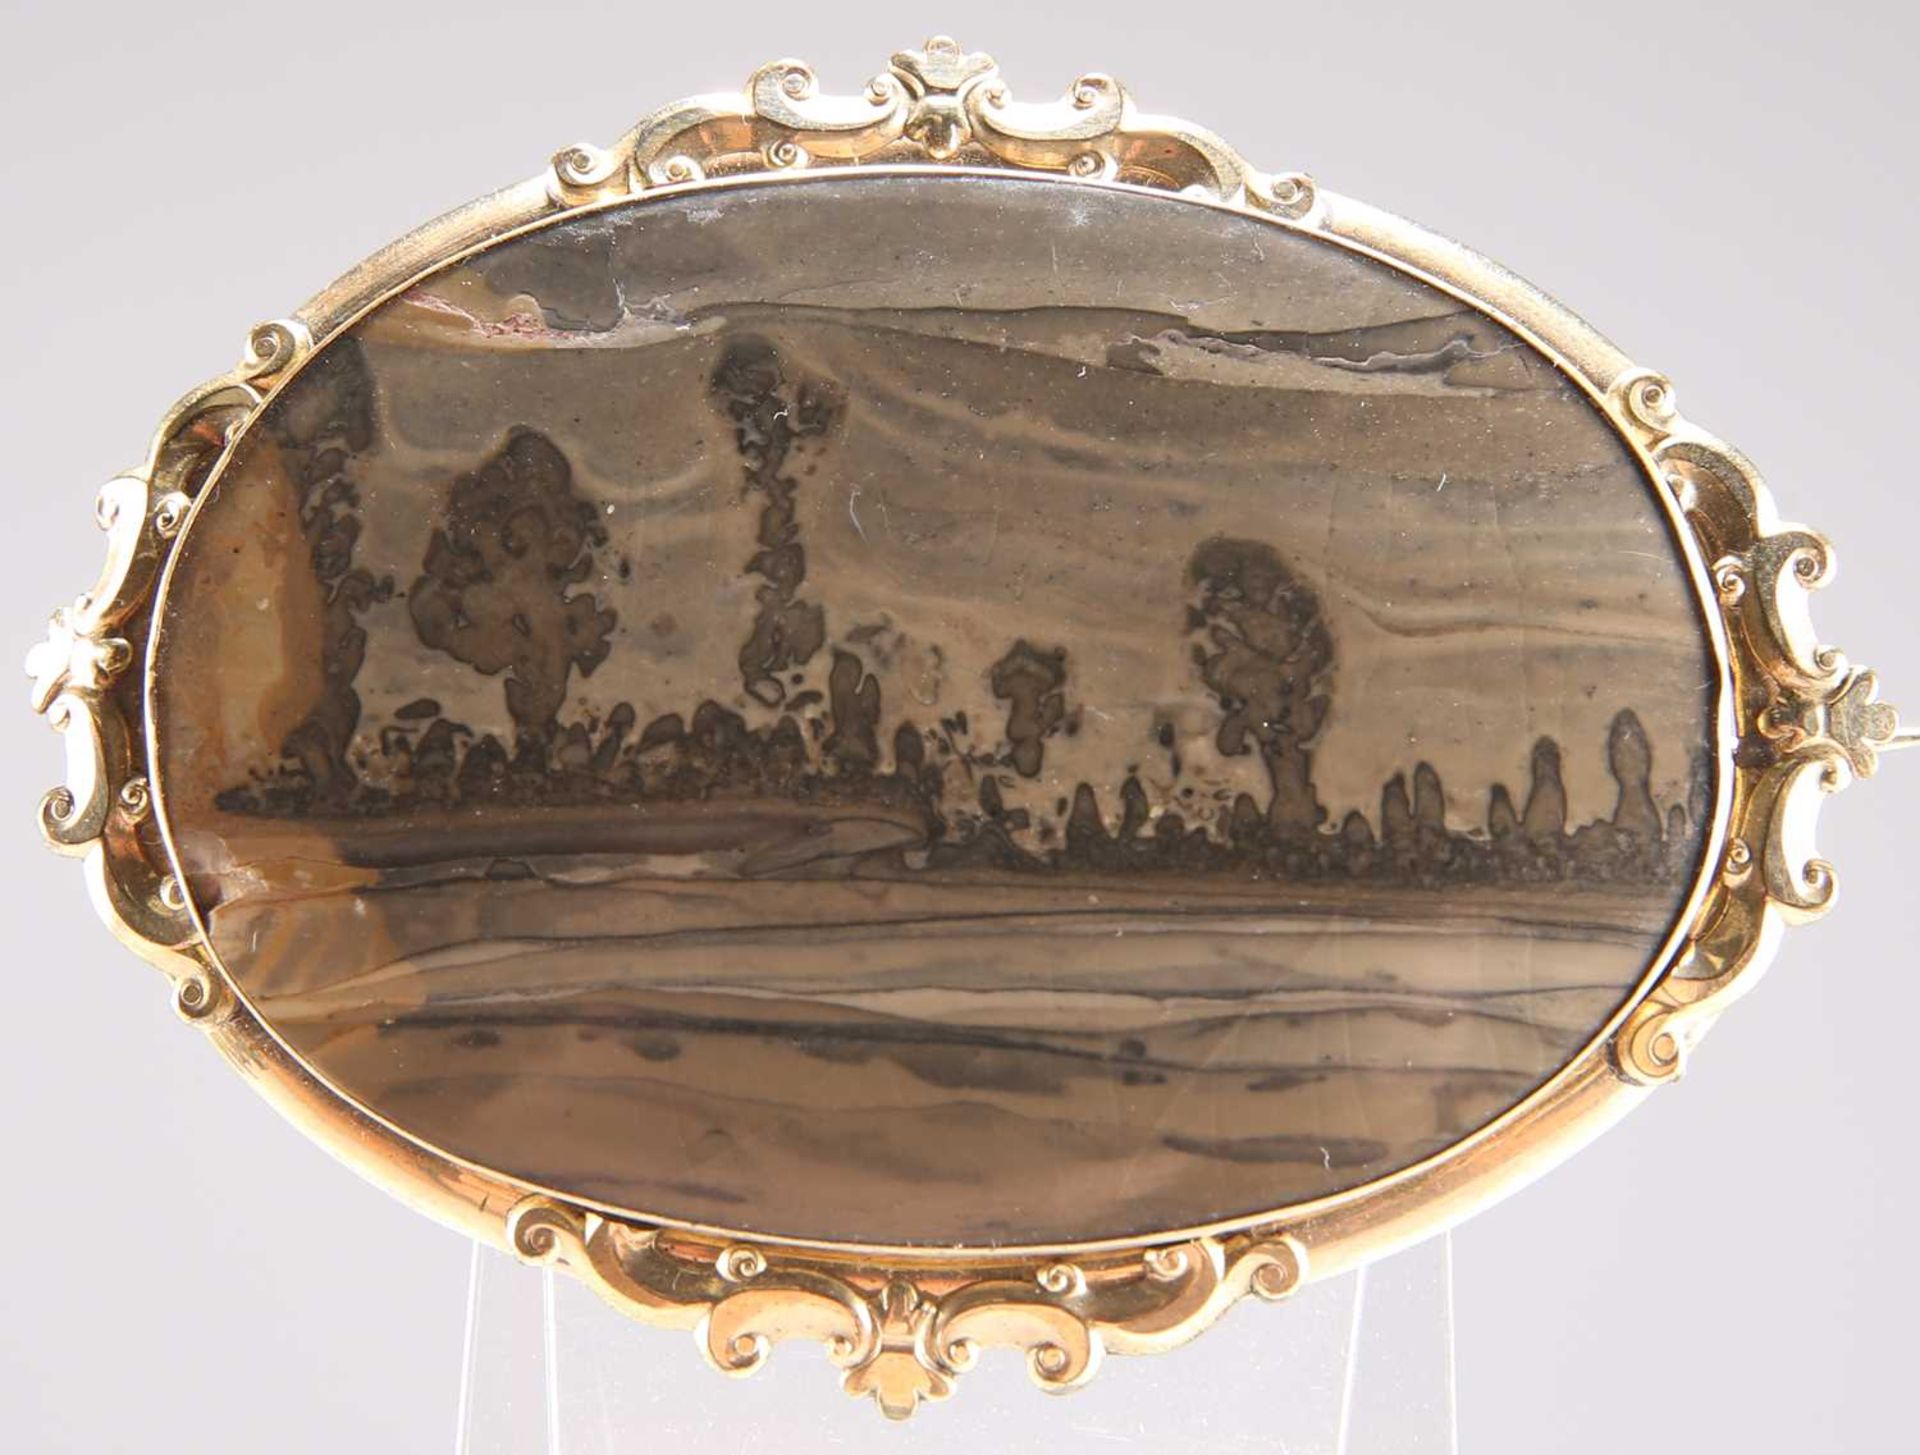 A VICTORIAN LANDSCAPE AGATE LARGE BROOCH